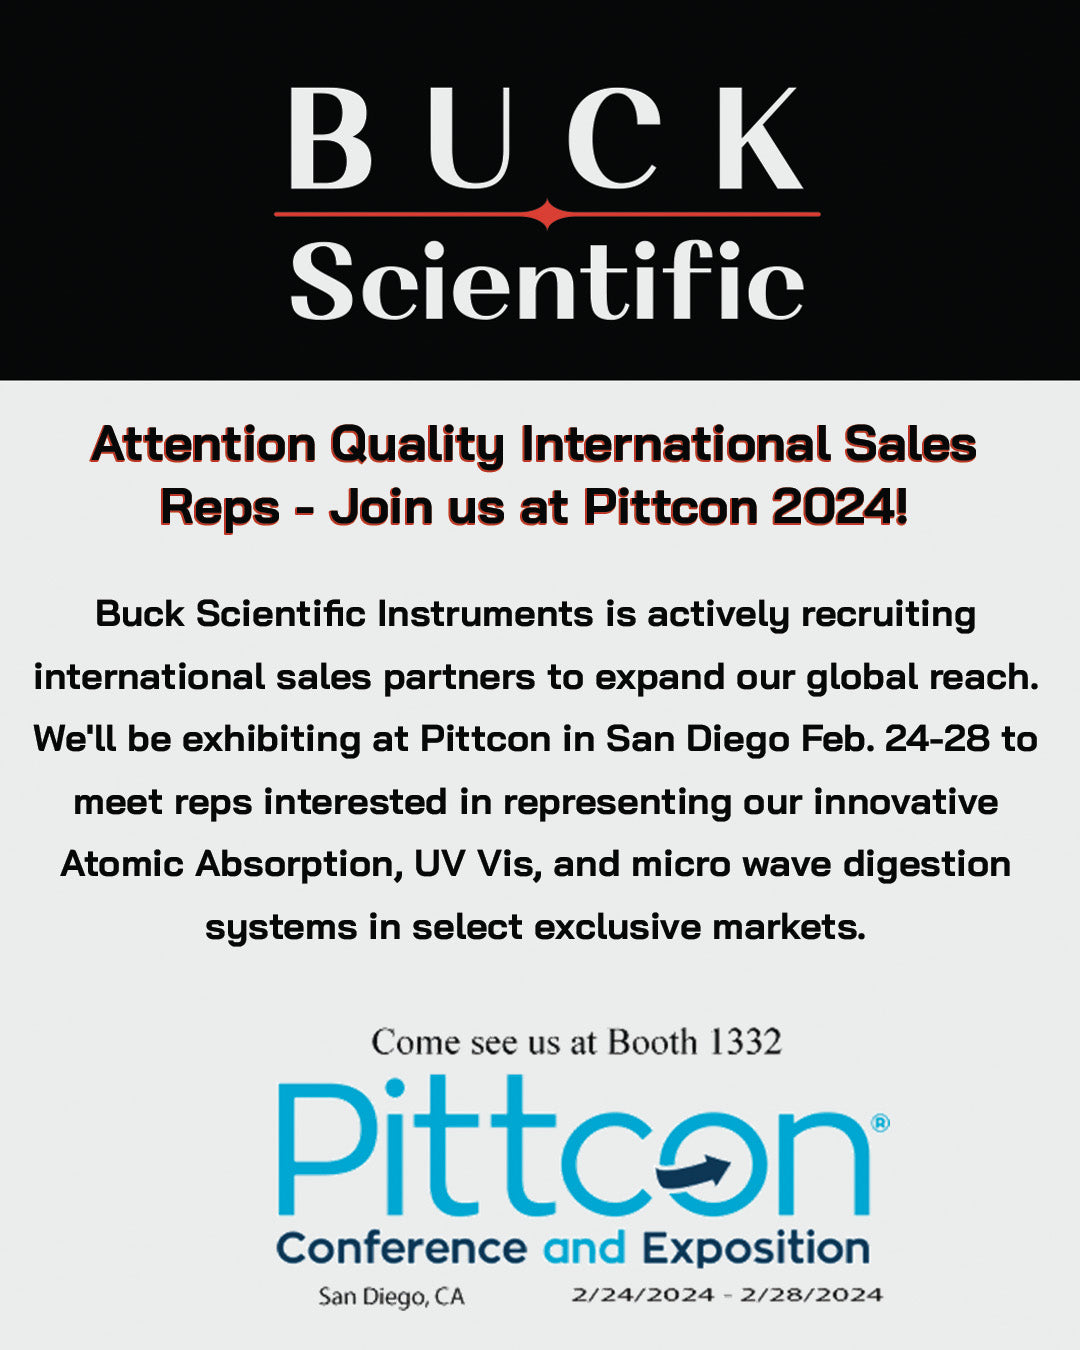 Attention Quality International Sales Reps - Join us at Pittcon 2024!